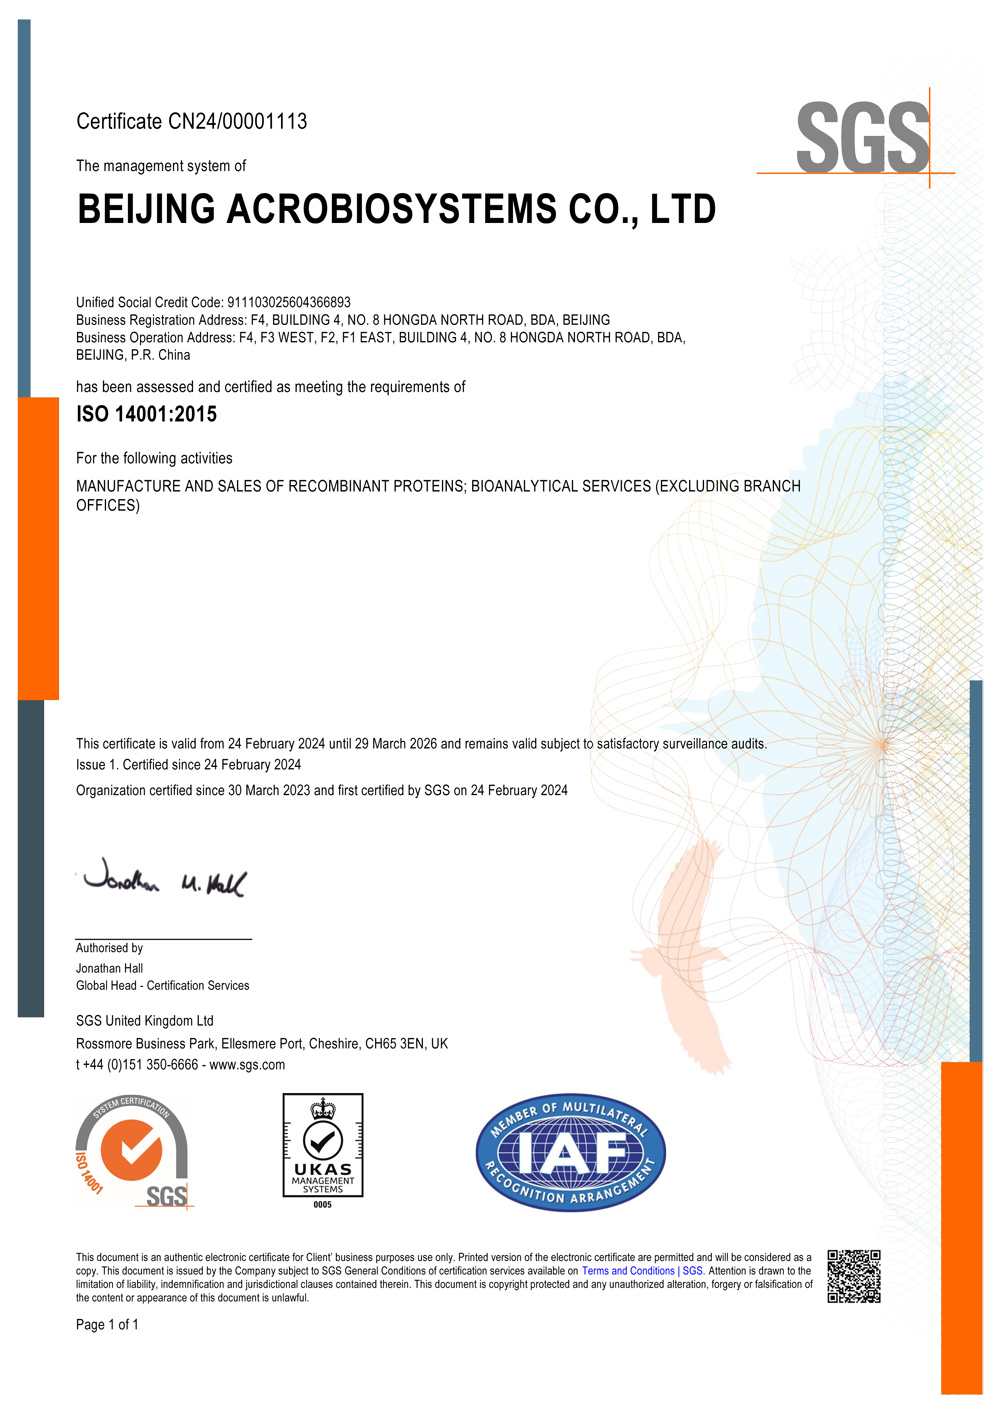 obtained ISO14001